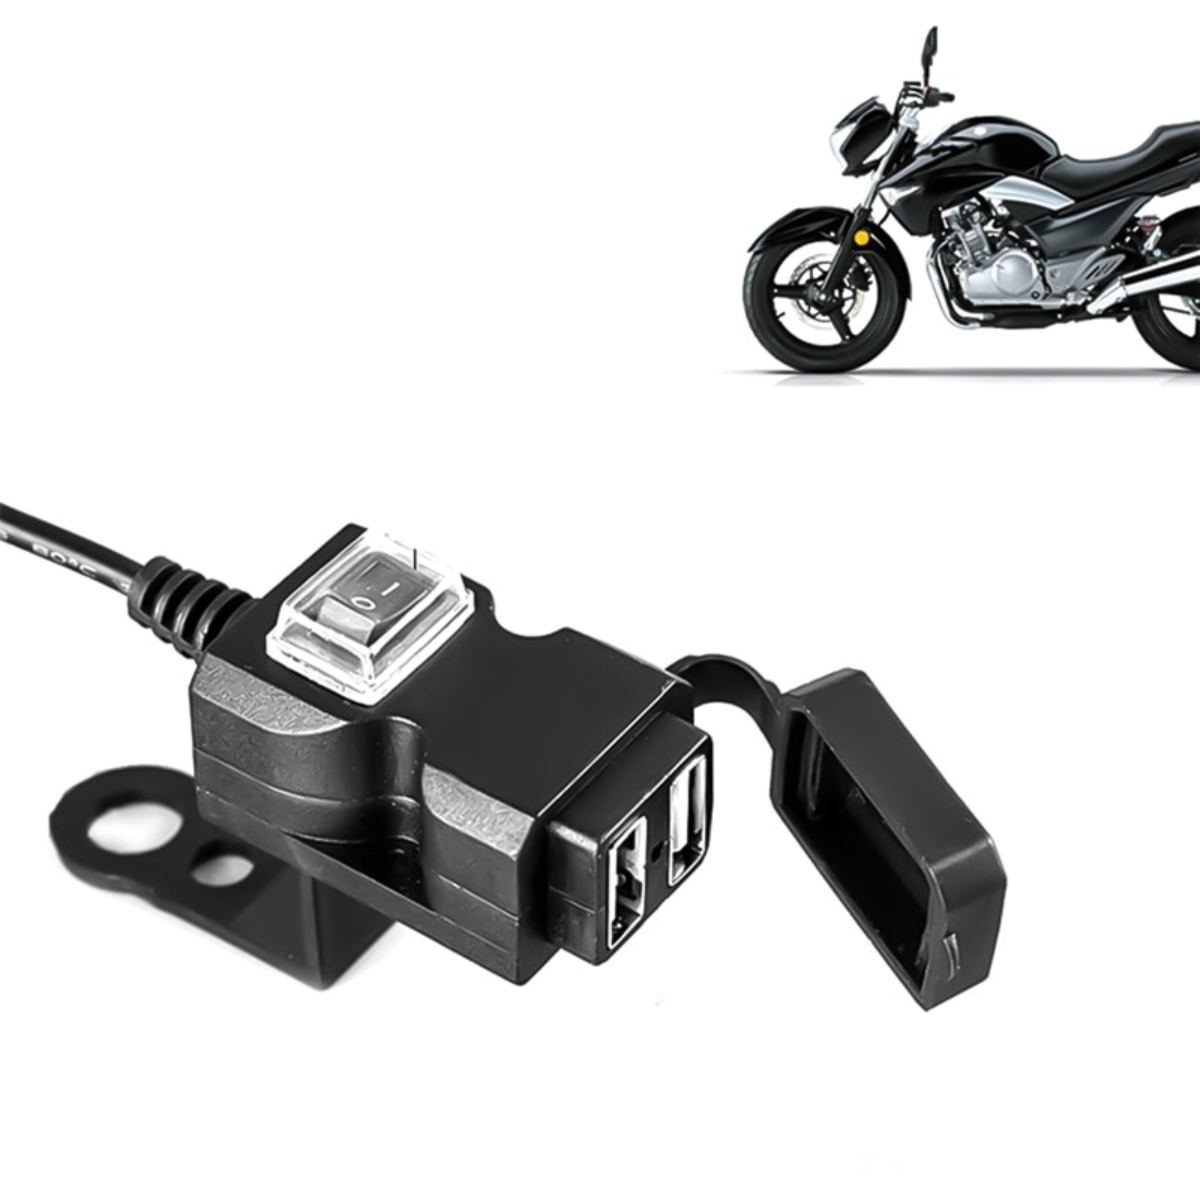 Dual USB Port 12V-24V Waterproof Motorcycle Handlebar Charger 5V 1A/2.1A Adapter for Mobile Phone - American Legend Rider